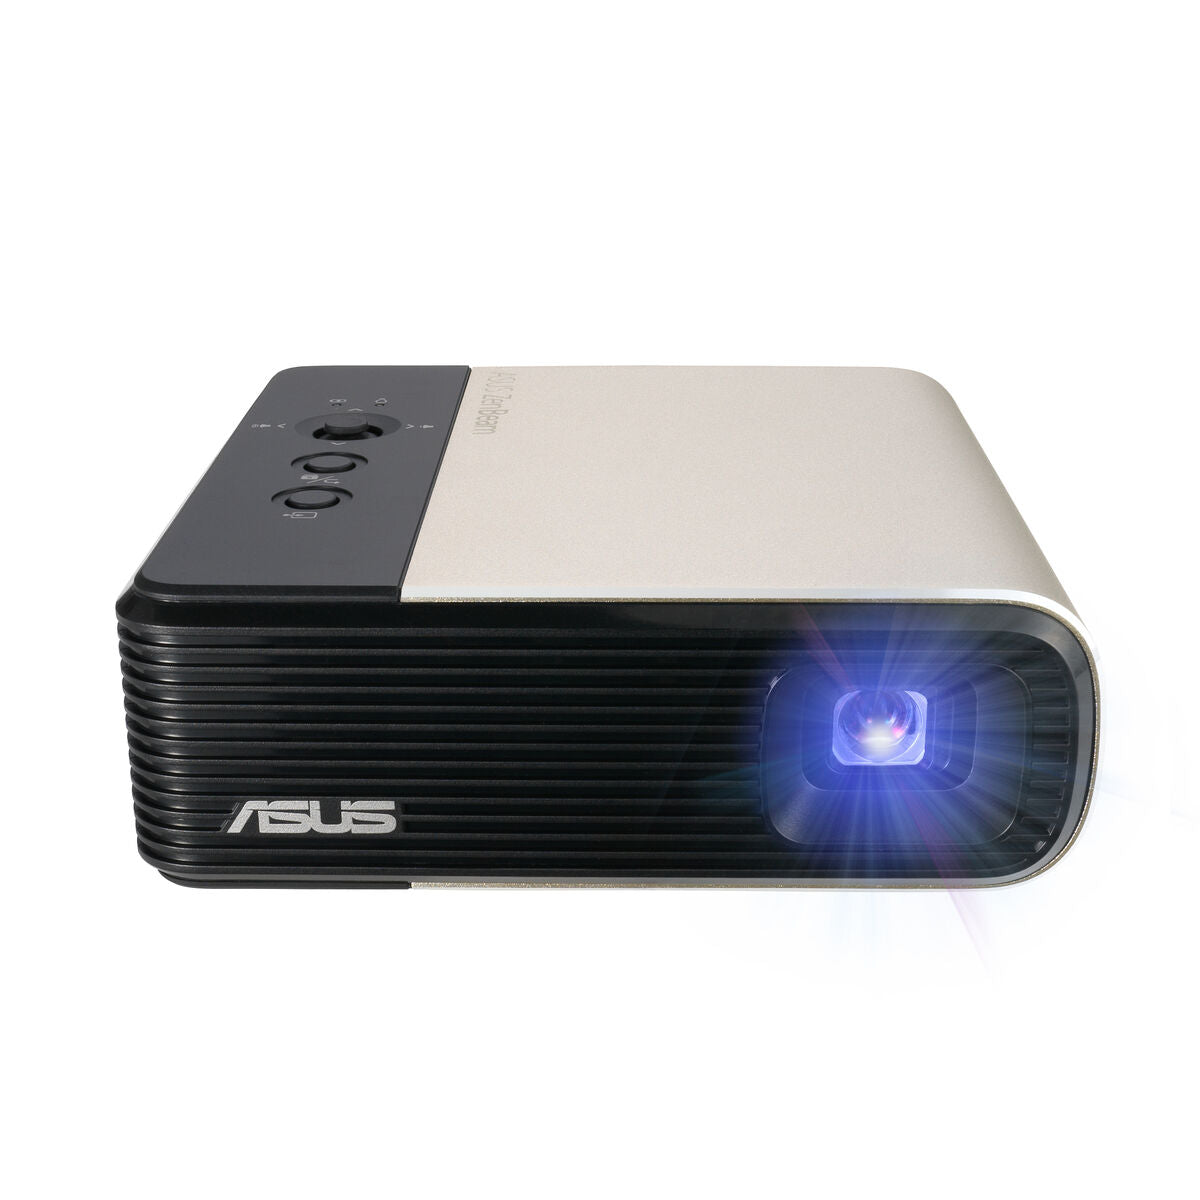 Proyector Asus 90LJ00H3-B01170 Full HD WVGA 300 Lm 854 x 480 px